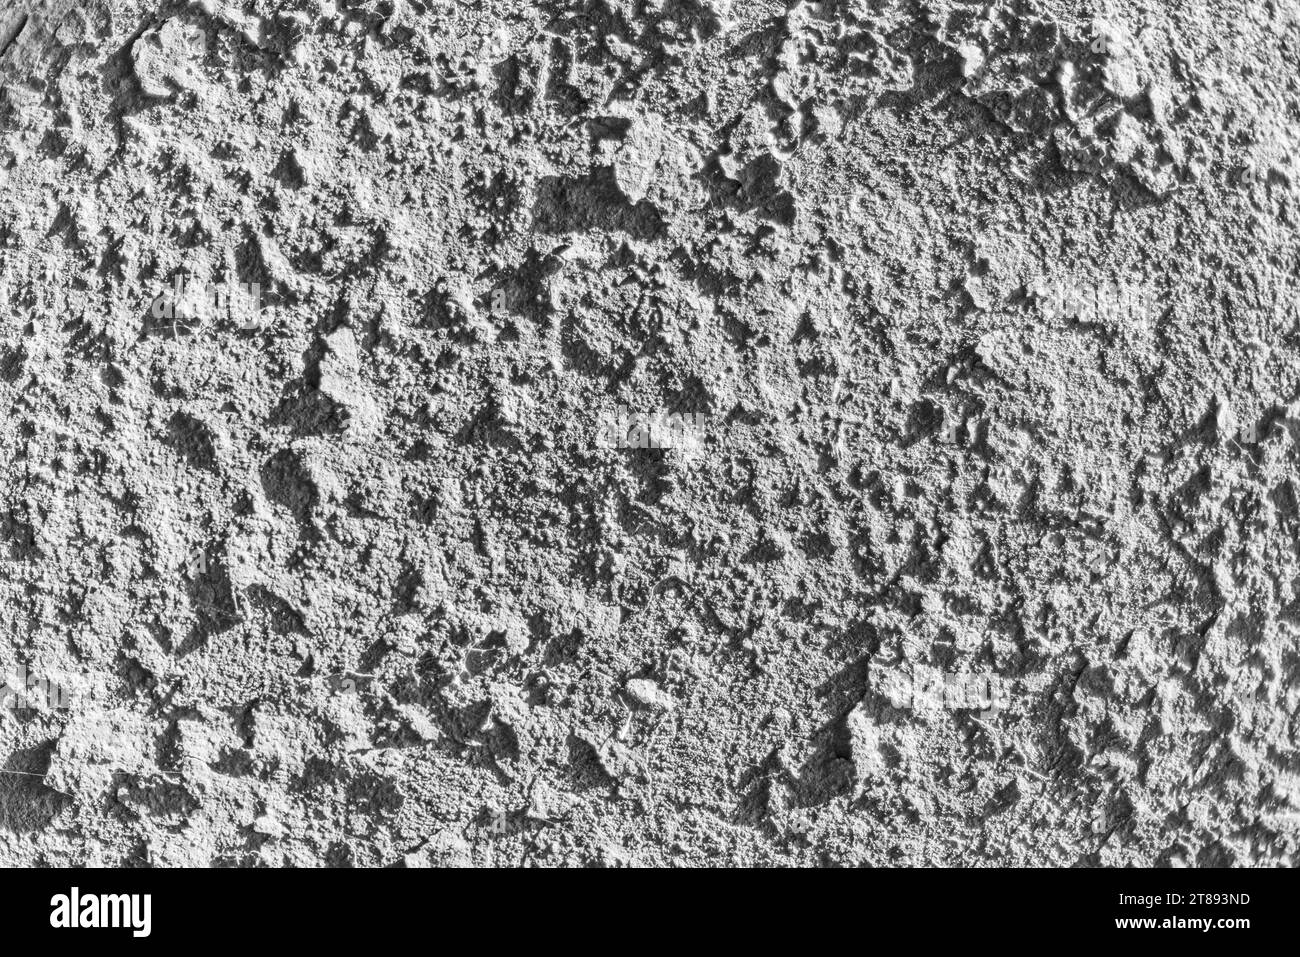 Background from gray ash resembling lunar soil. Stock Photo